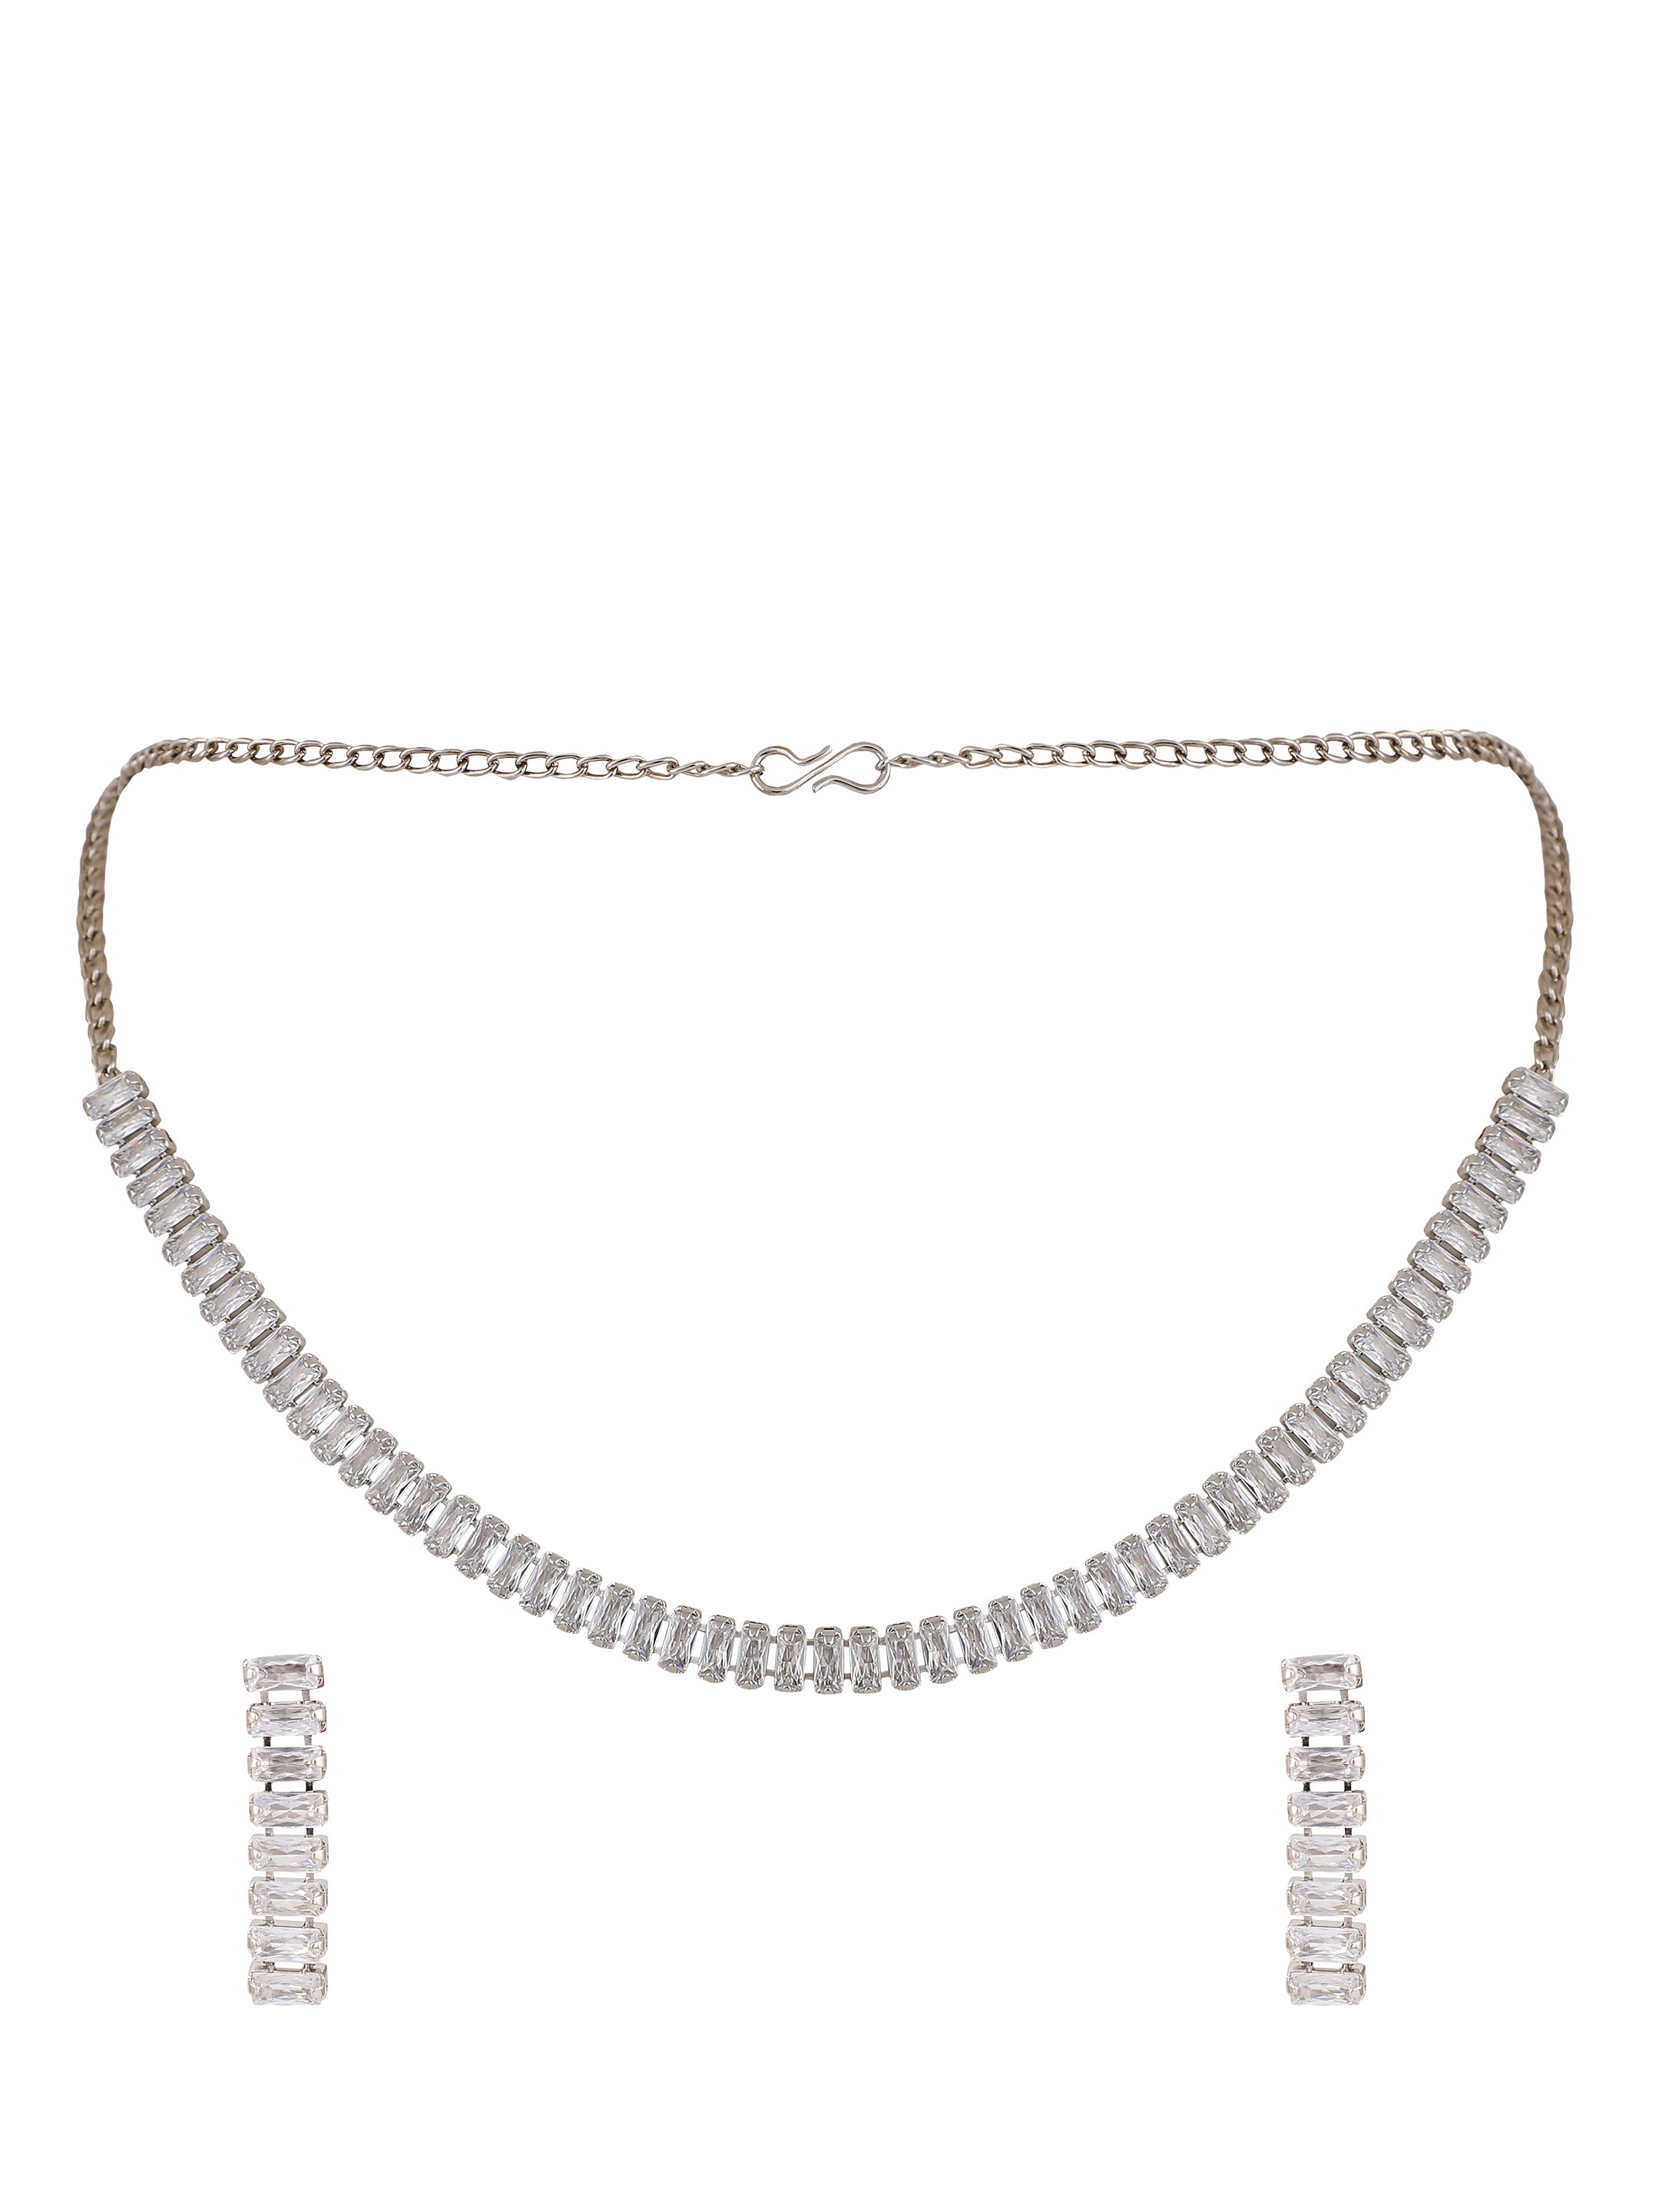 Women's Ad Silver Necklace Set - Zaffre Collections